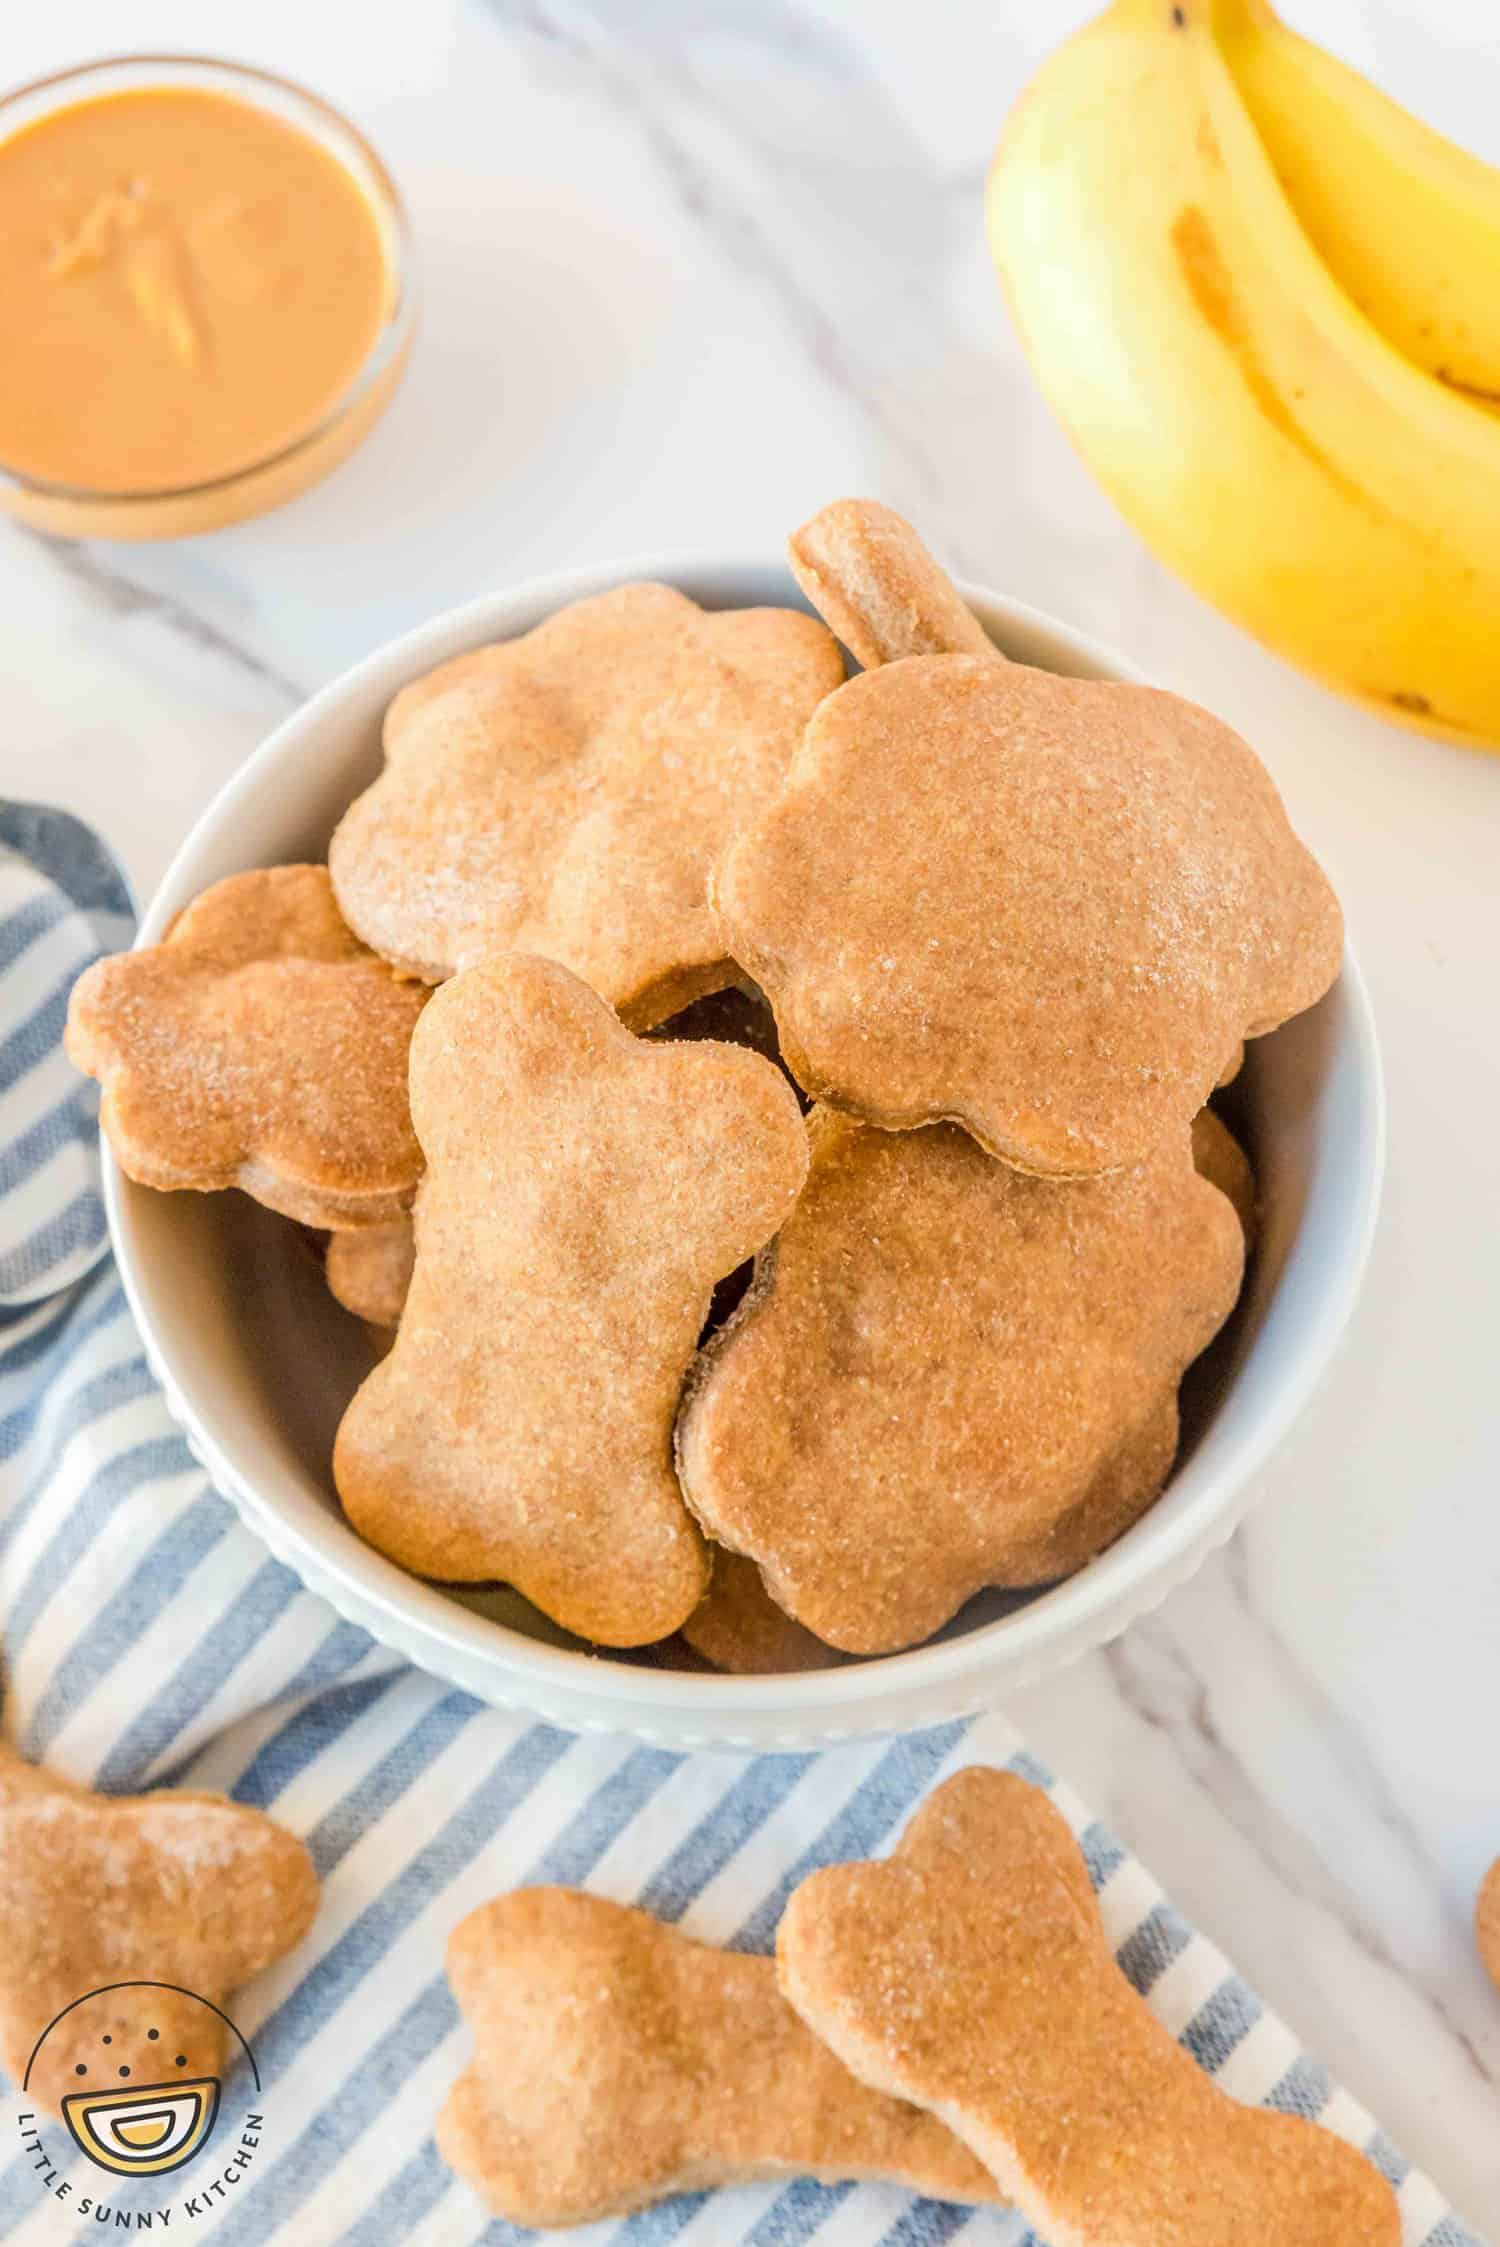 Dog Treat Baking Supplies You'll Want in Your Kitchen